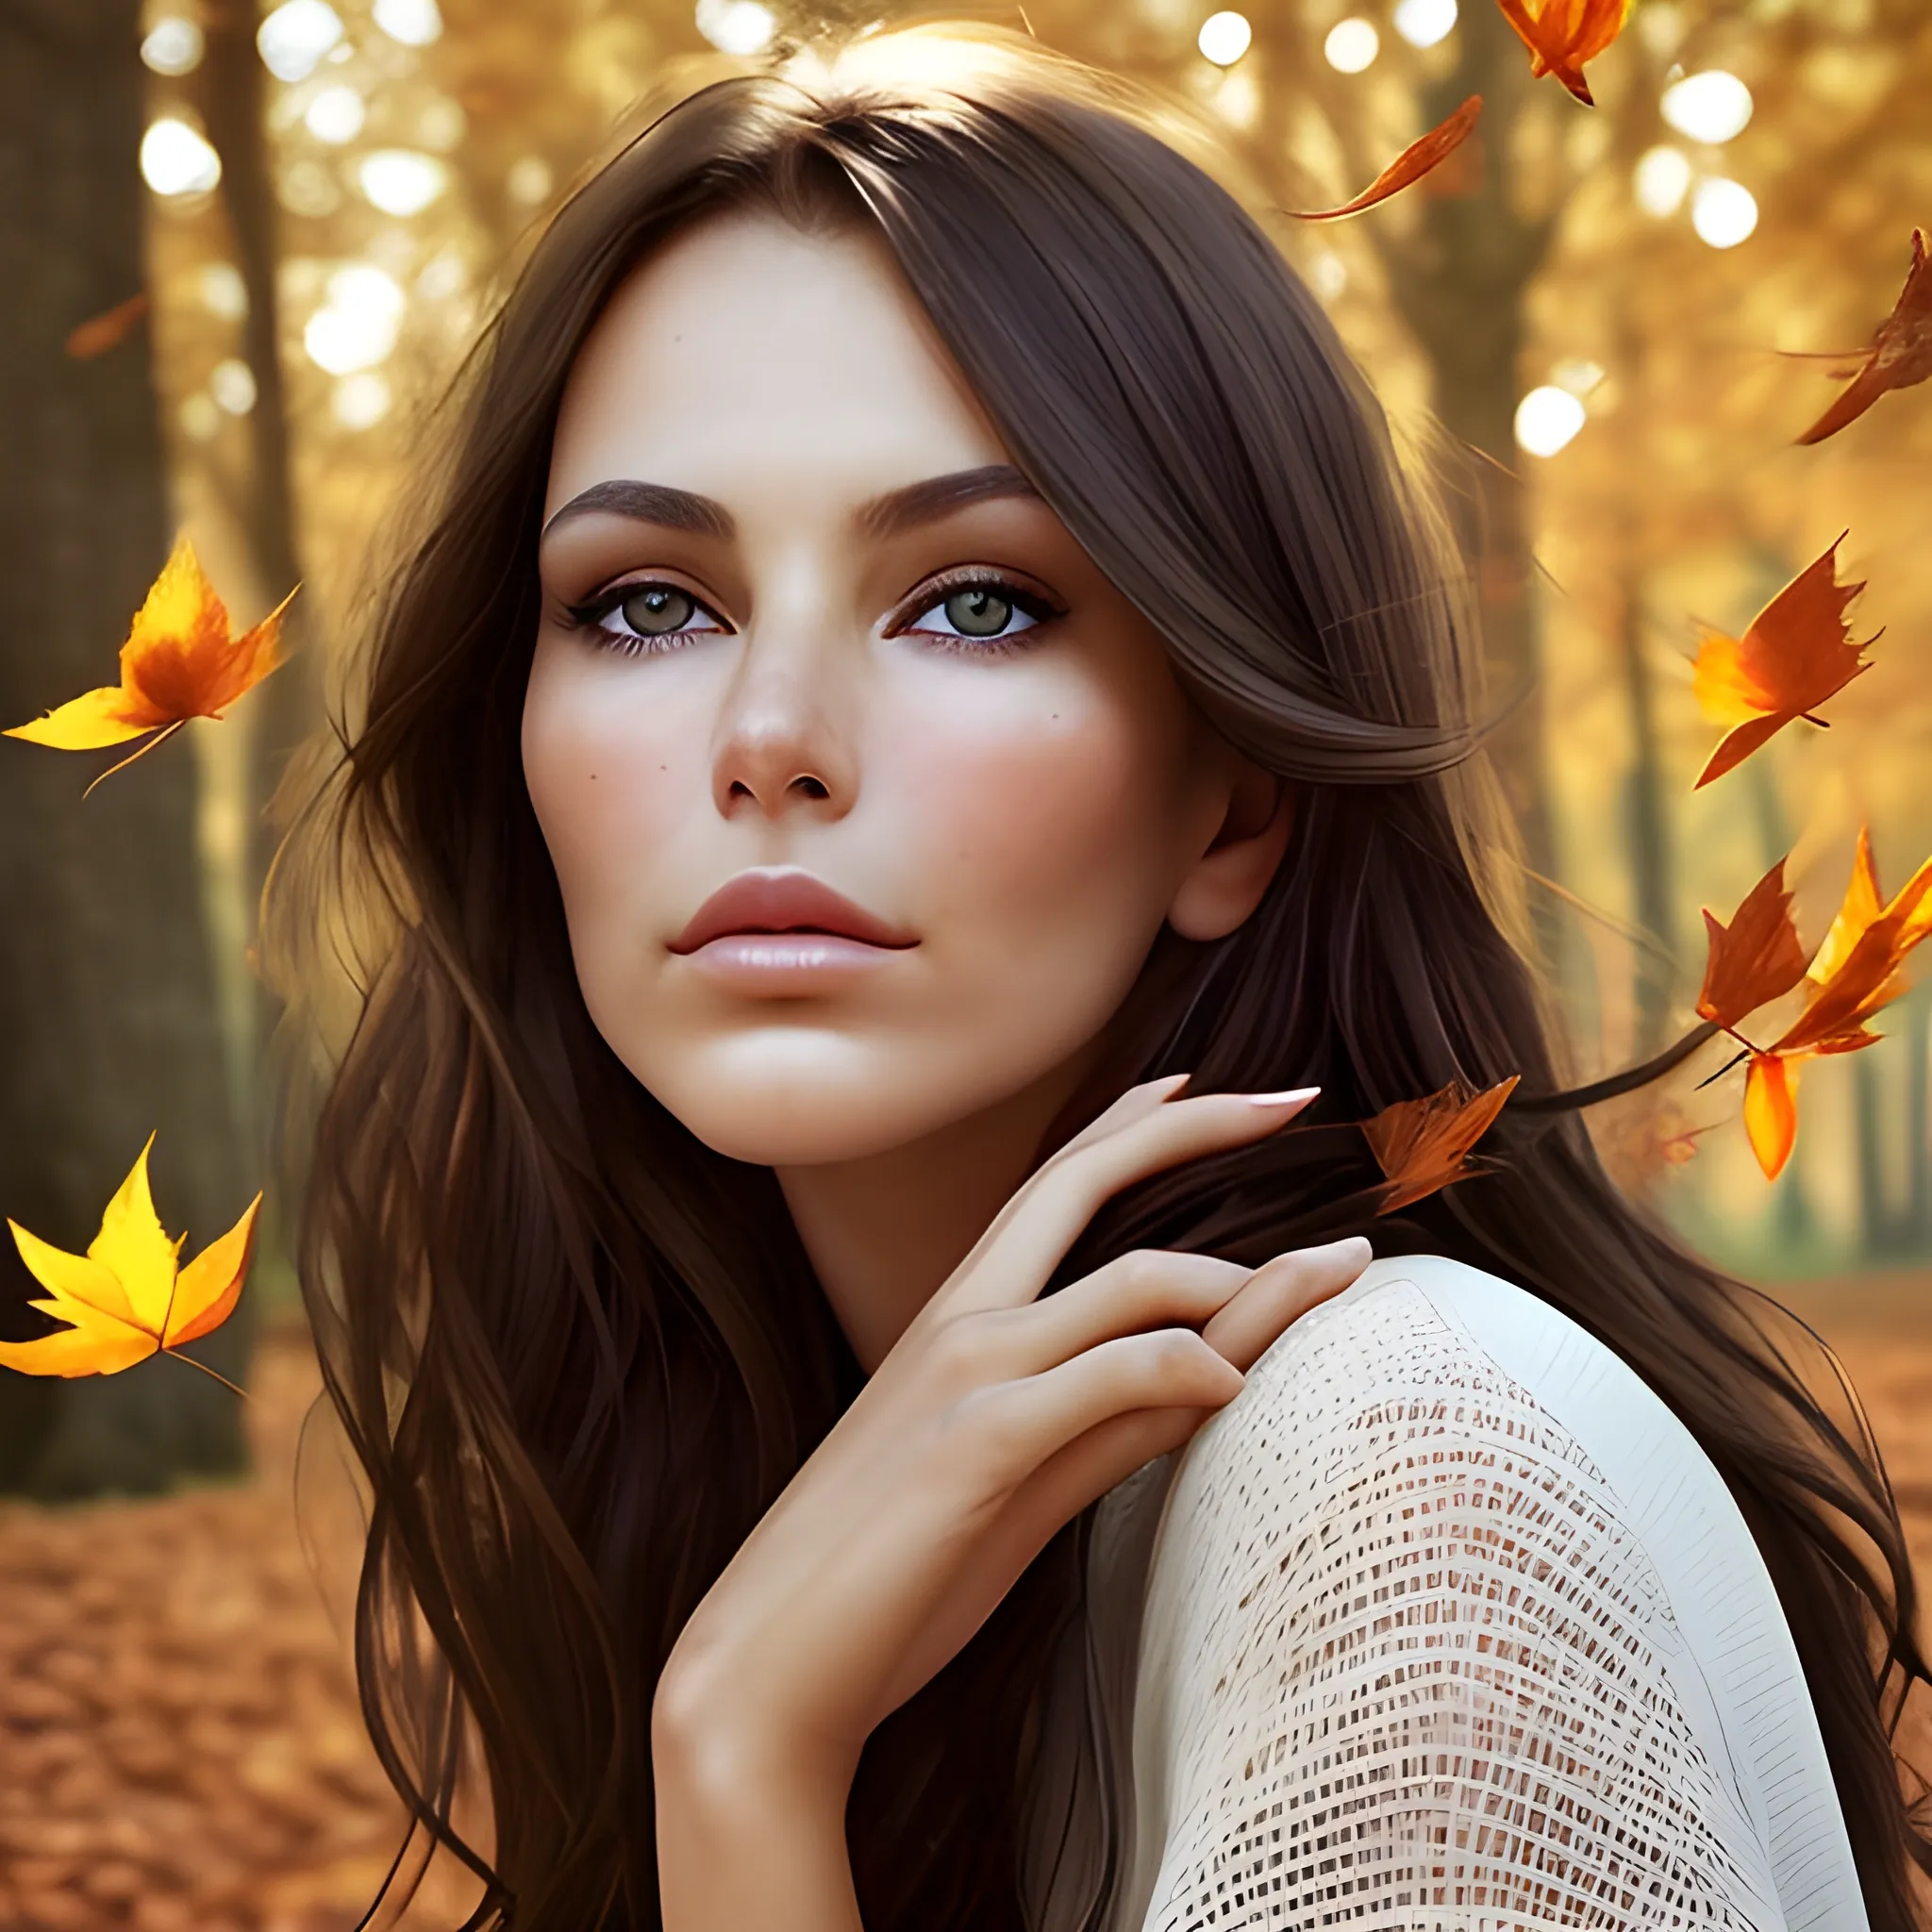 Catch the pensive, faraway look in the eyes of a beautiful brunette as afternoon sun filtering through trees dances across high cheekbones and full lips, lost in thoughts swirling like falling leaves upon a gentle autumn breeze.